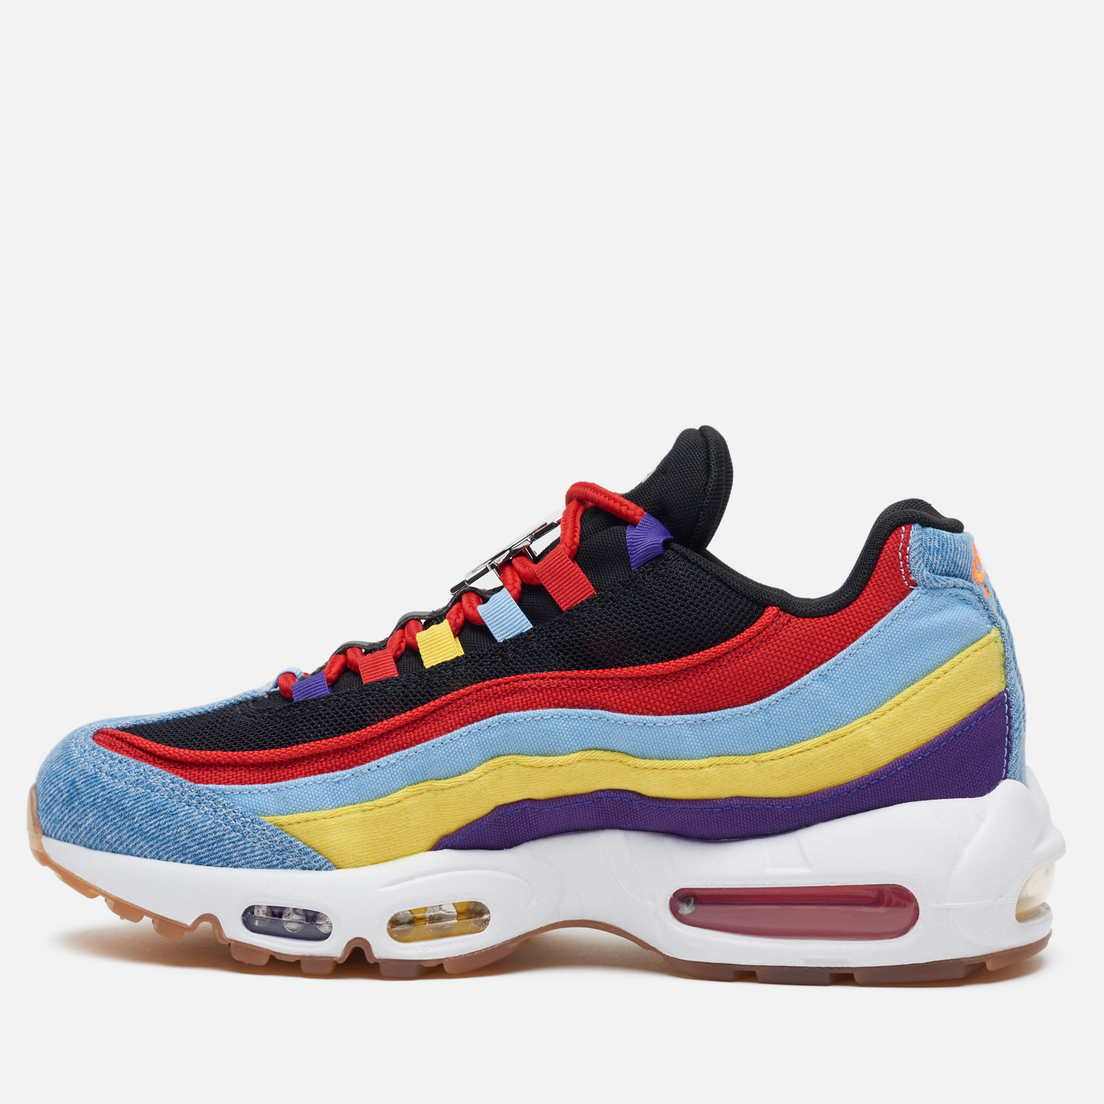 air max 95 offers